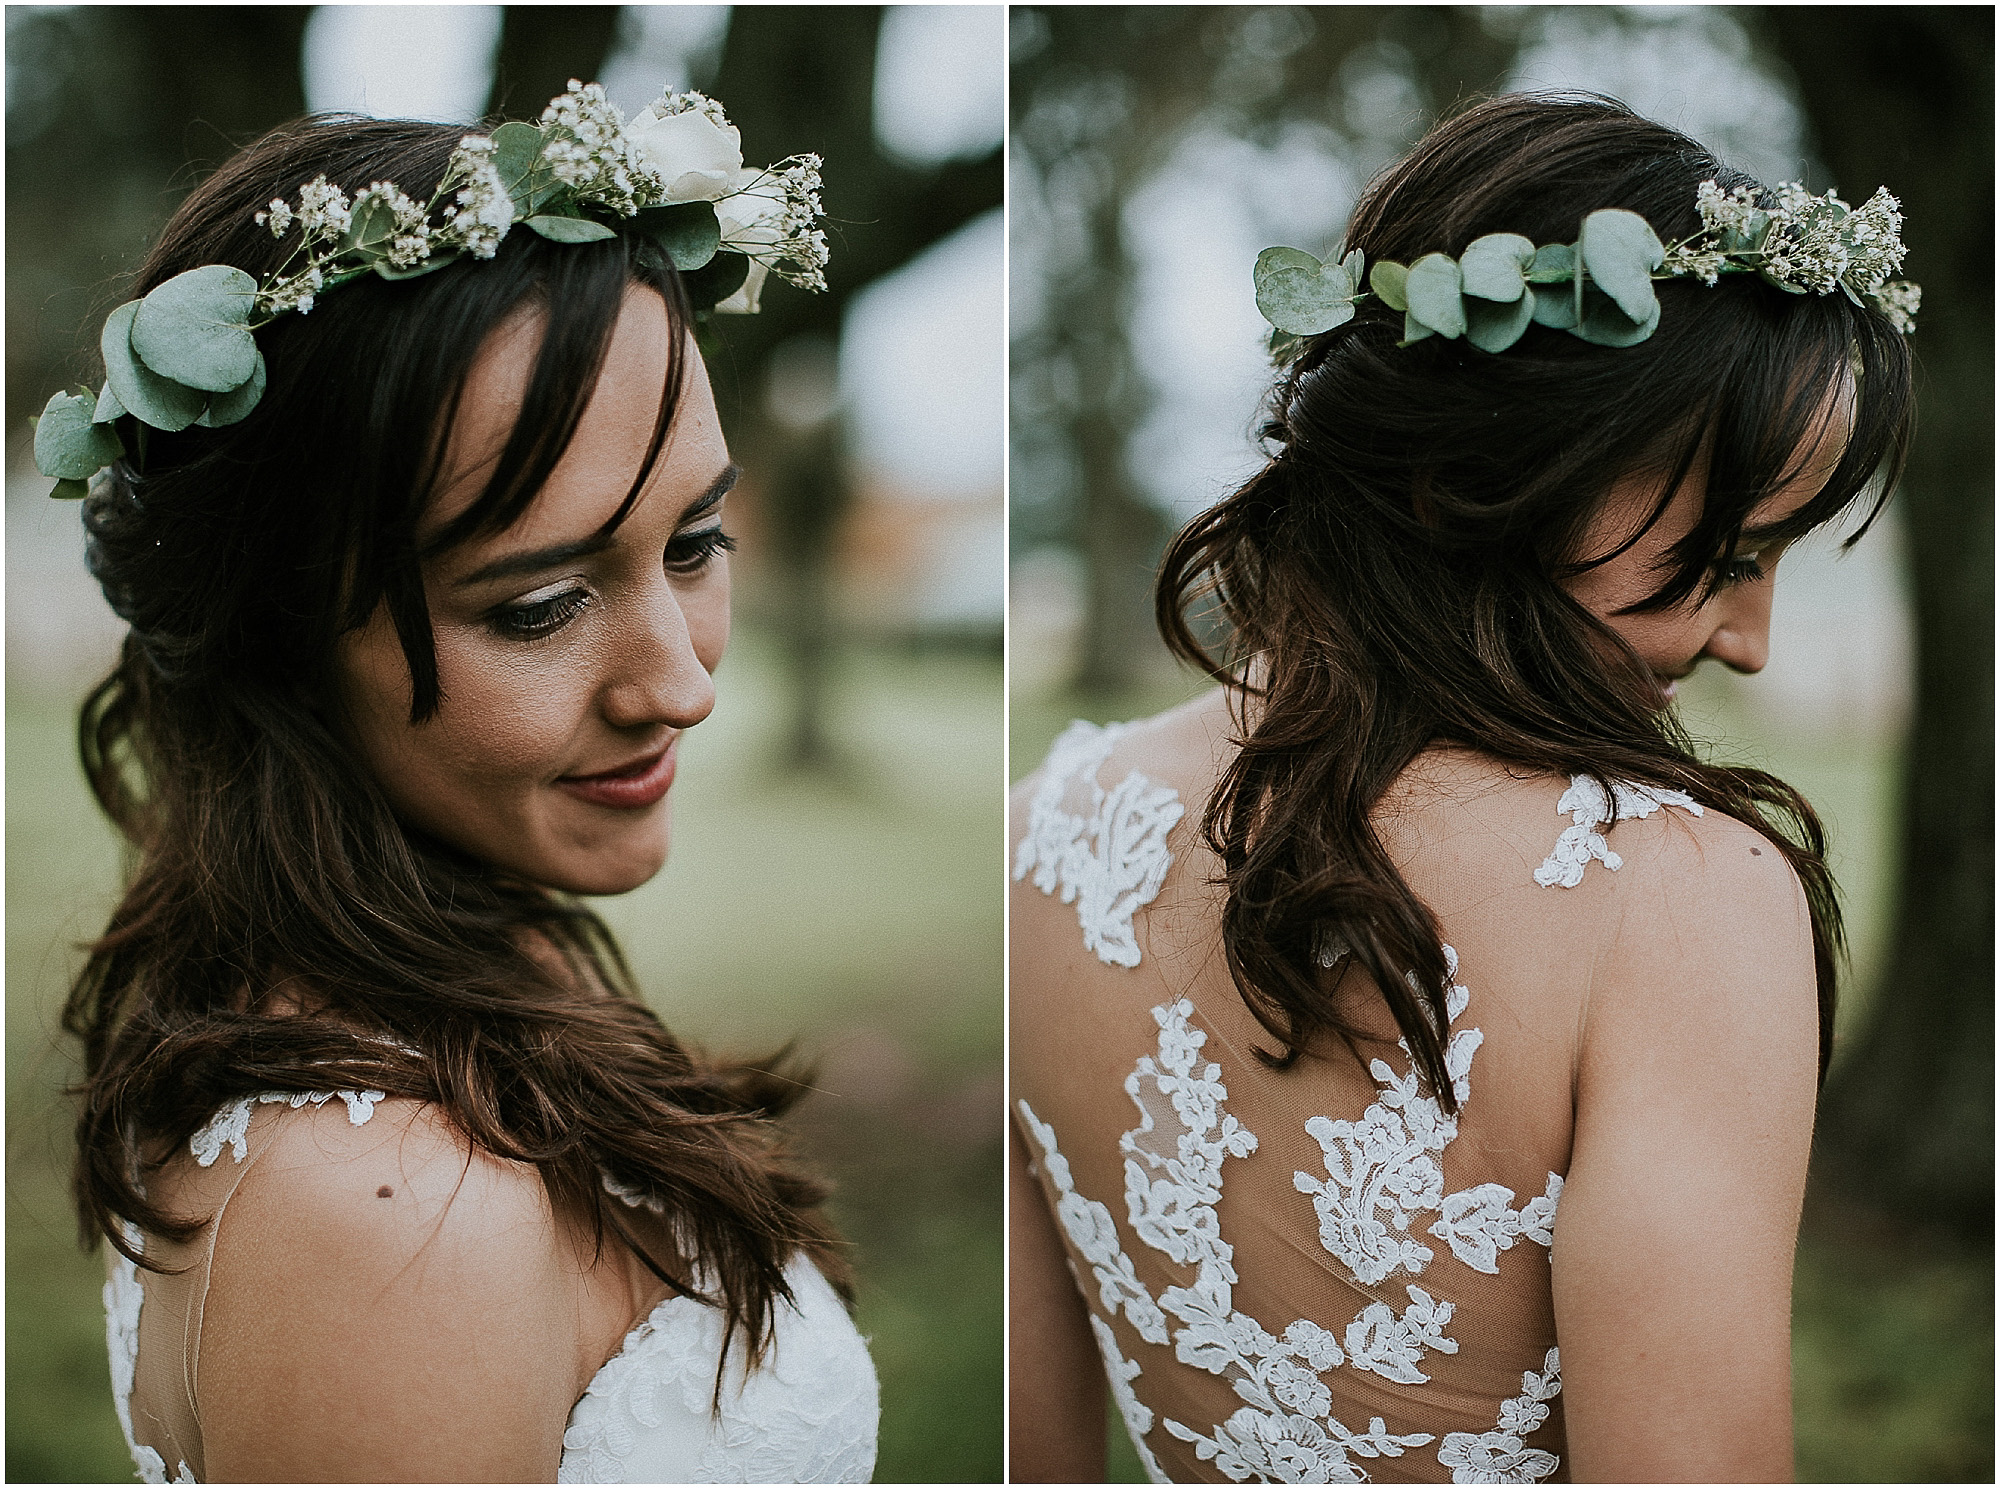 Outdoor-Forest-Destination-Wedding-Photographer-Maryke-Albertyn-Photography-Looks-Like-Film-Authentic-Alternative-Cape-Town-Pretoria-Silver-Sixpence-Dullstroom-Bridal-Portraits